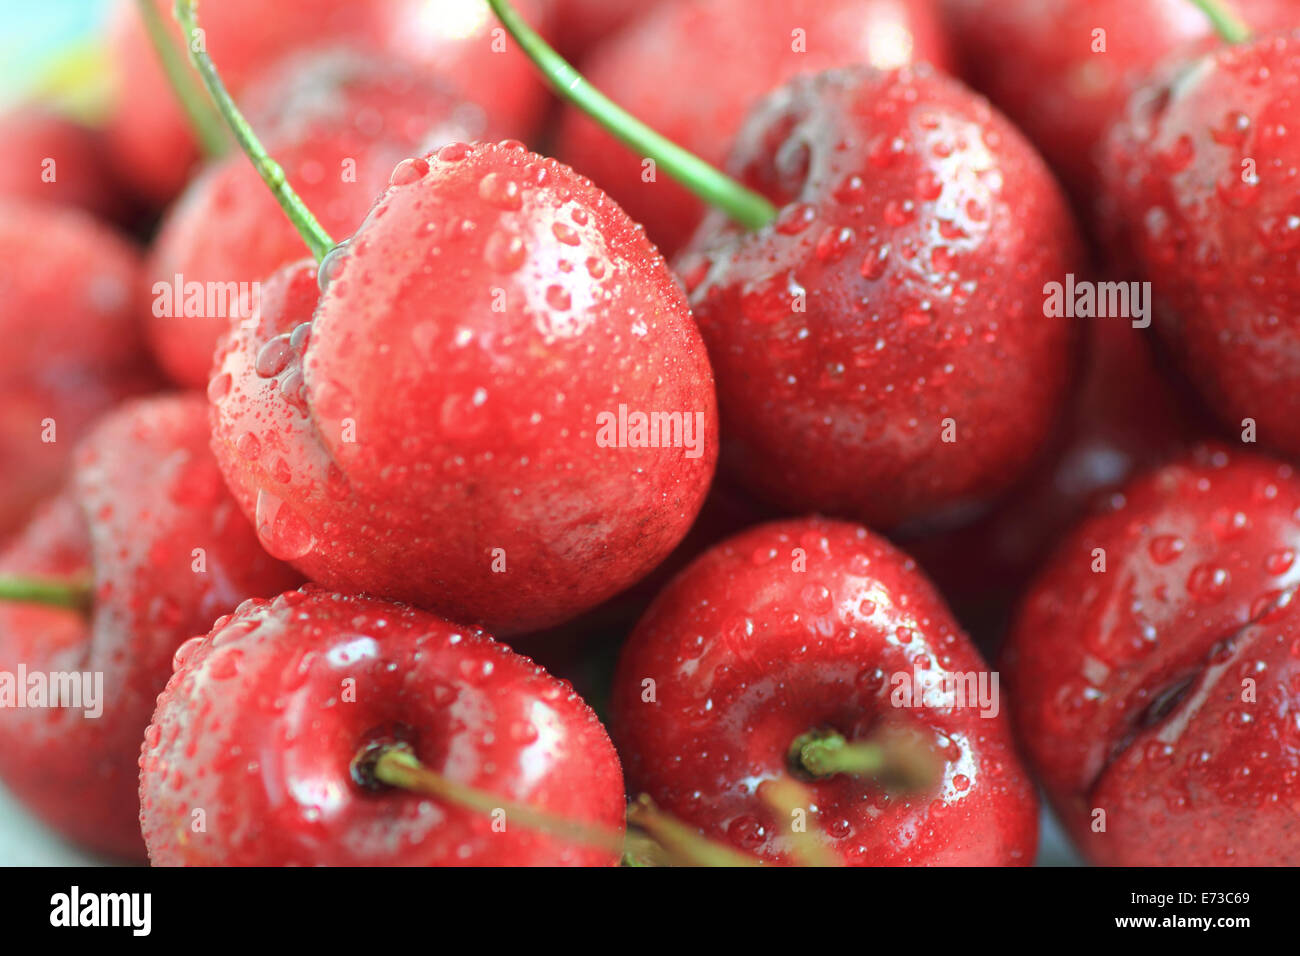 Cherries in the plate Stock Photo